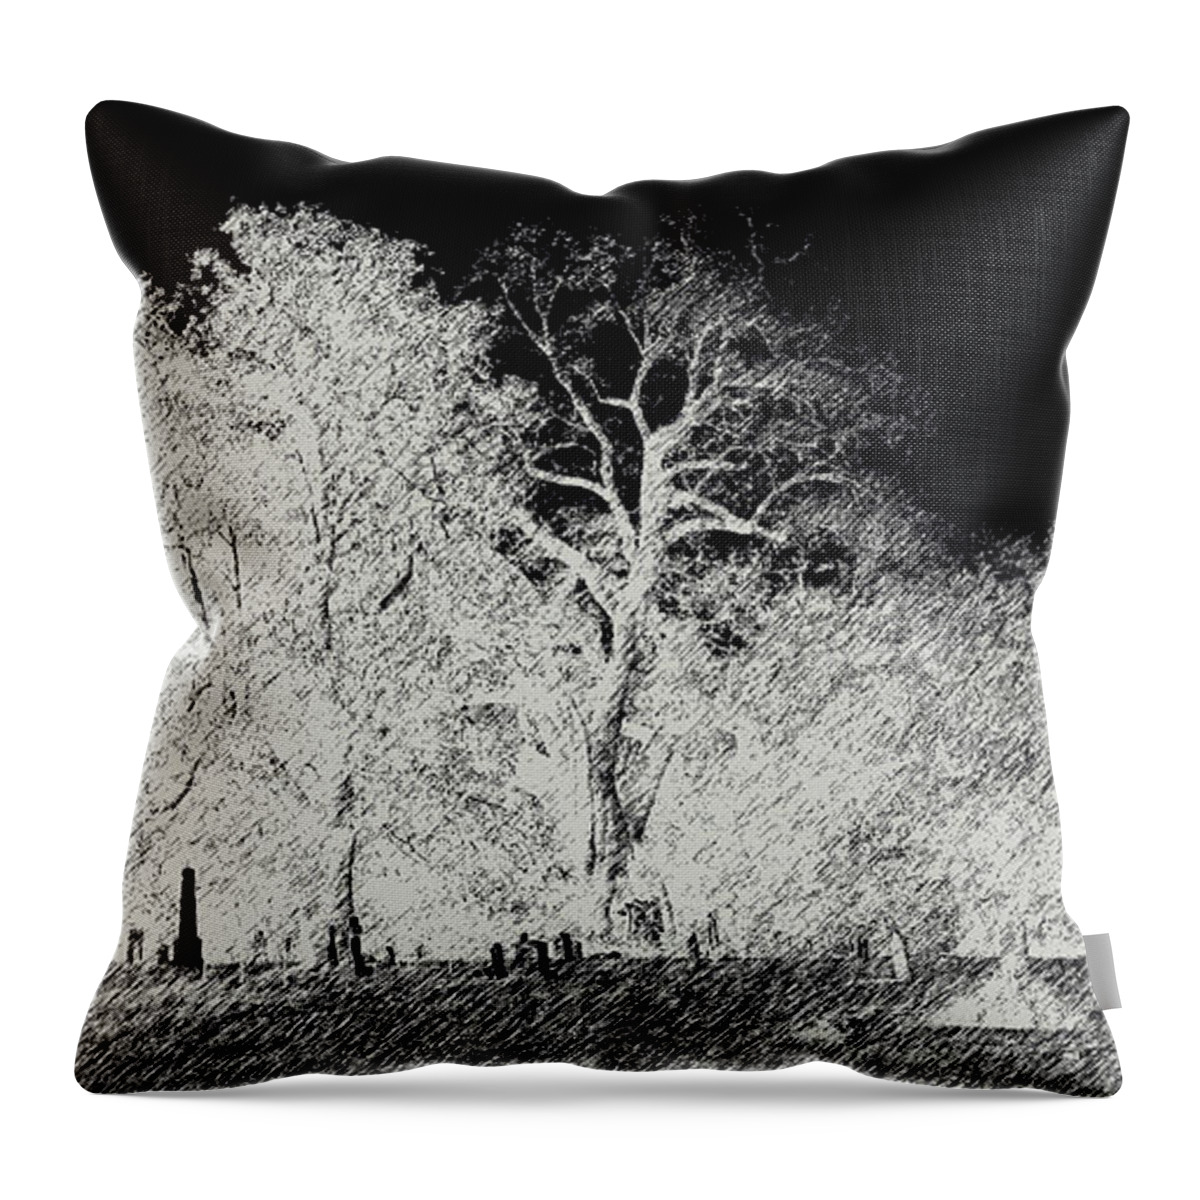 Skyline Throw Pillow featuring the photograph Night Protector by Max Mullins